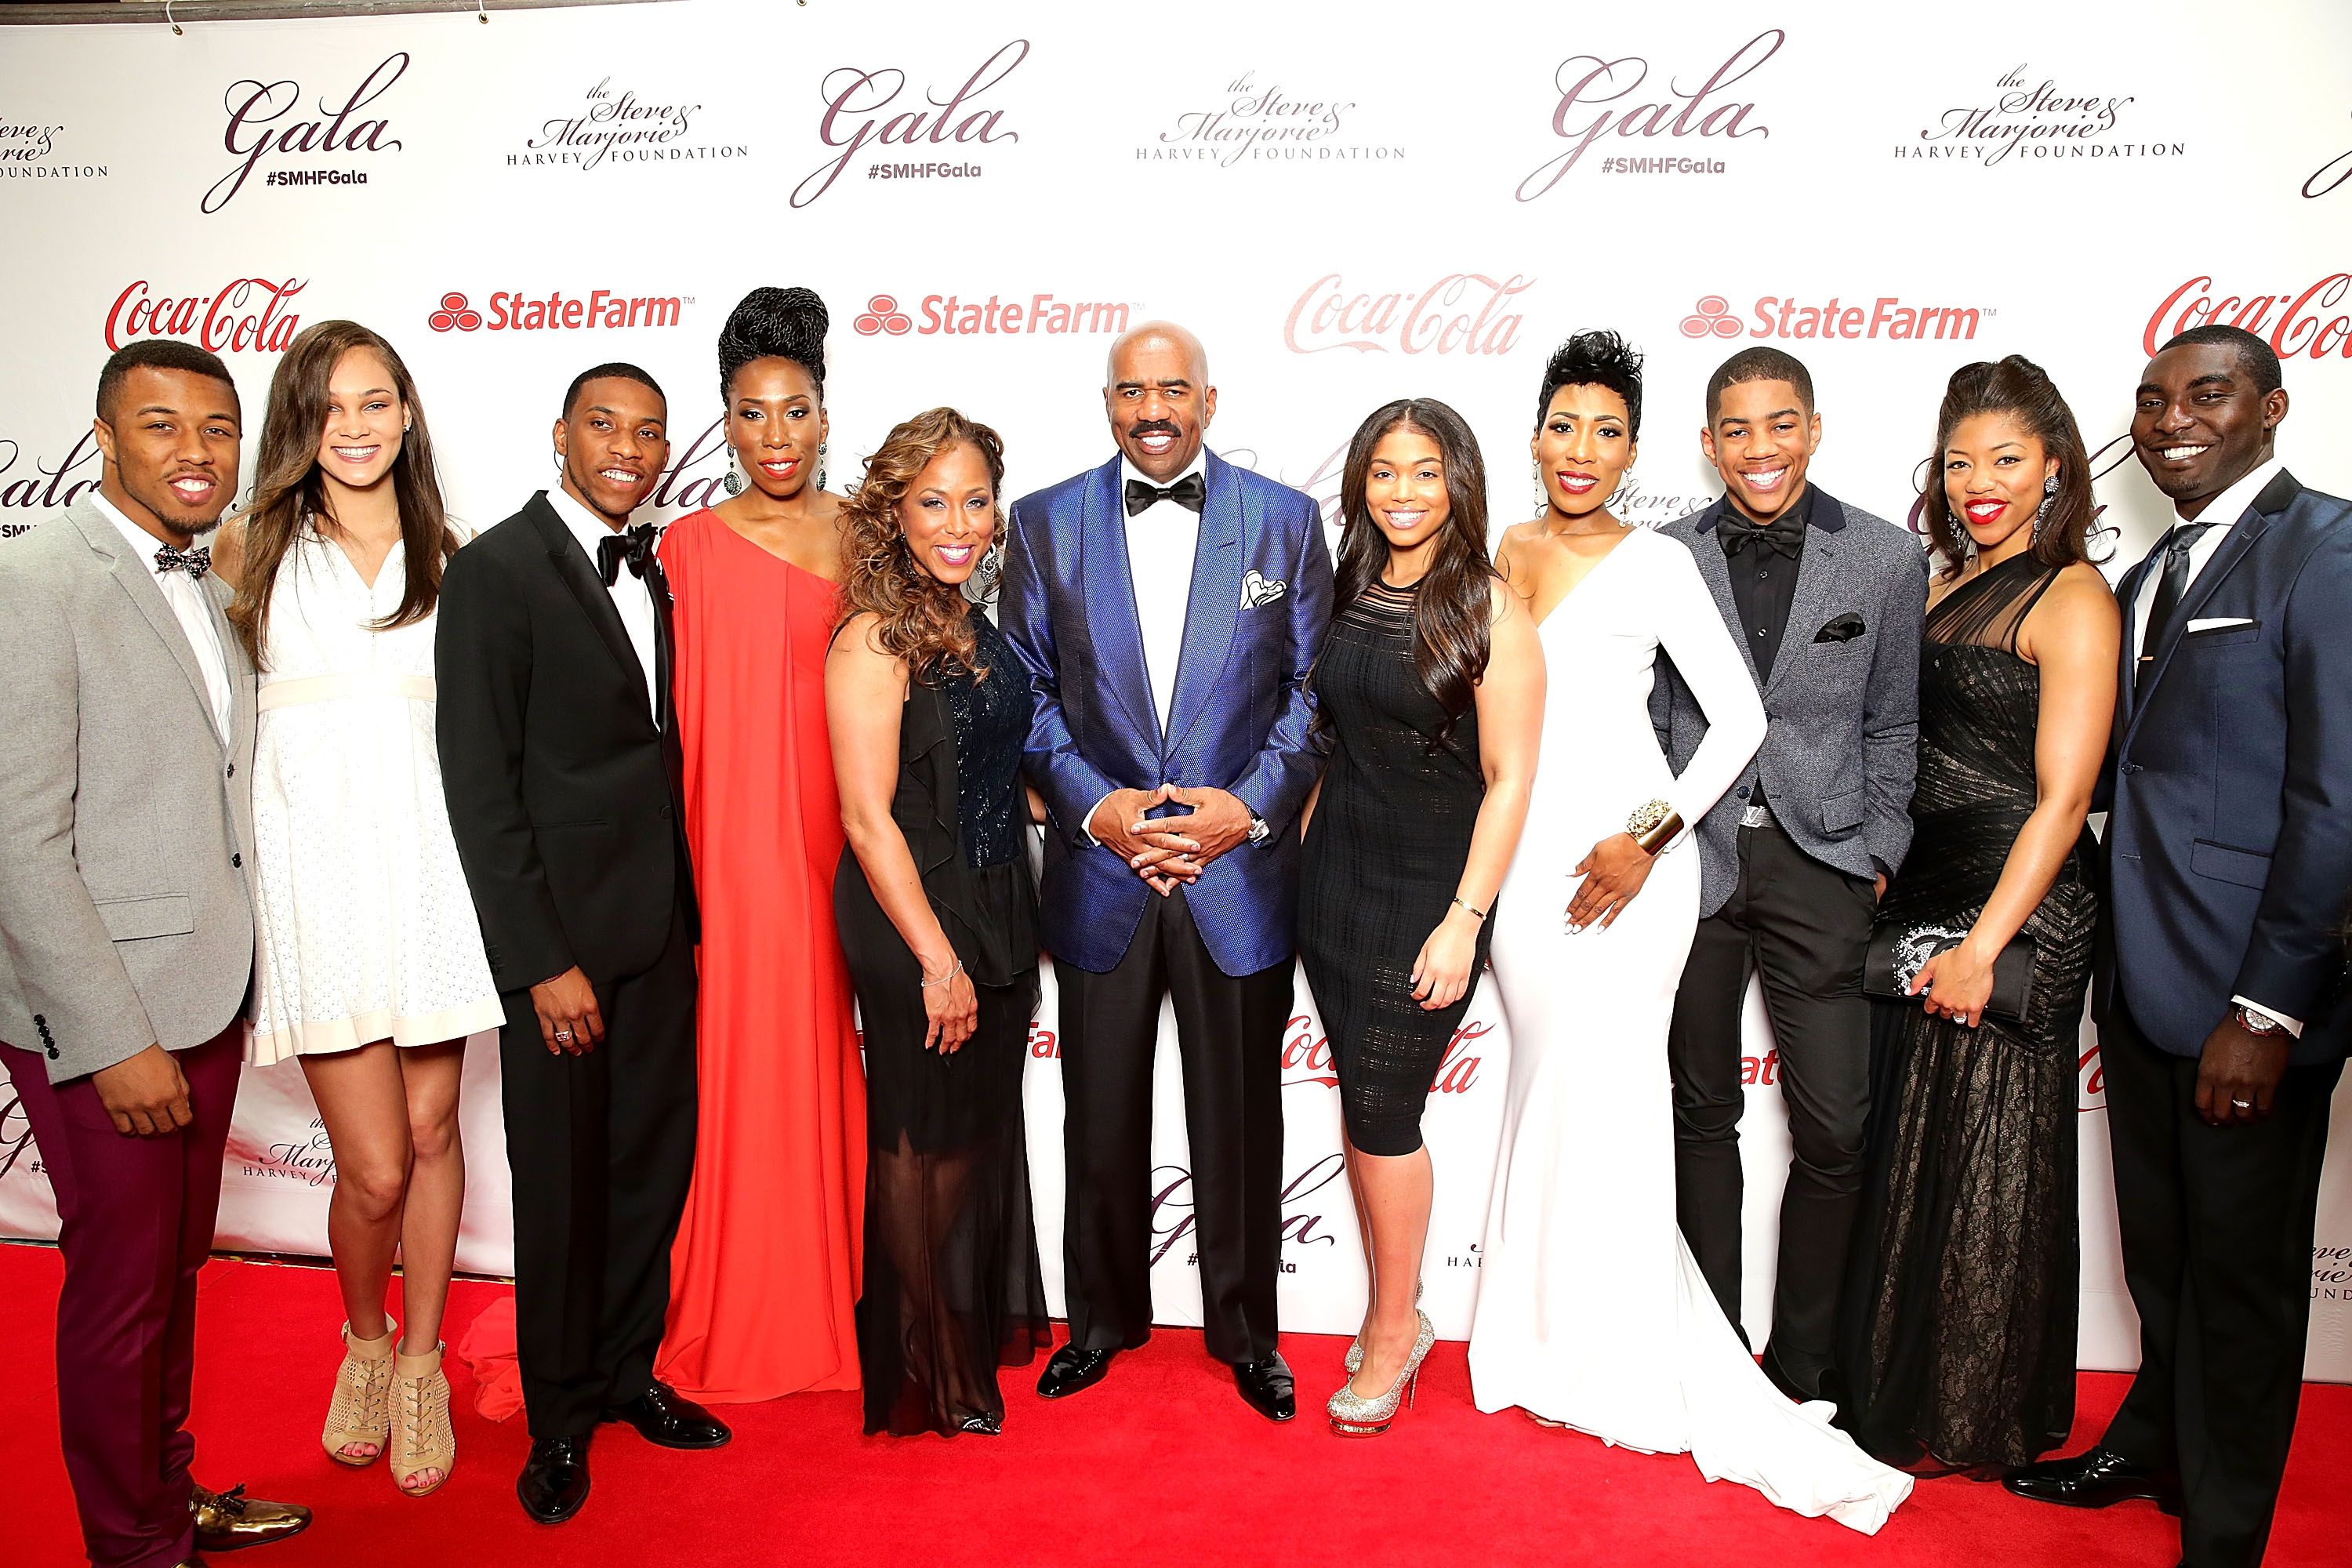 Steve and Marjorie Harvey, with their blended family at the Steve & Marjorie Harvey Foundation Gala in 2014 in Illinois | Photo: Getty Images